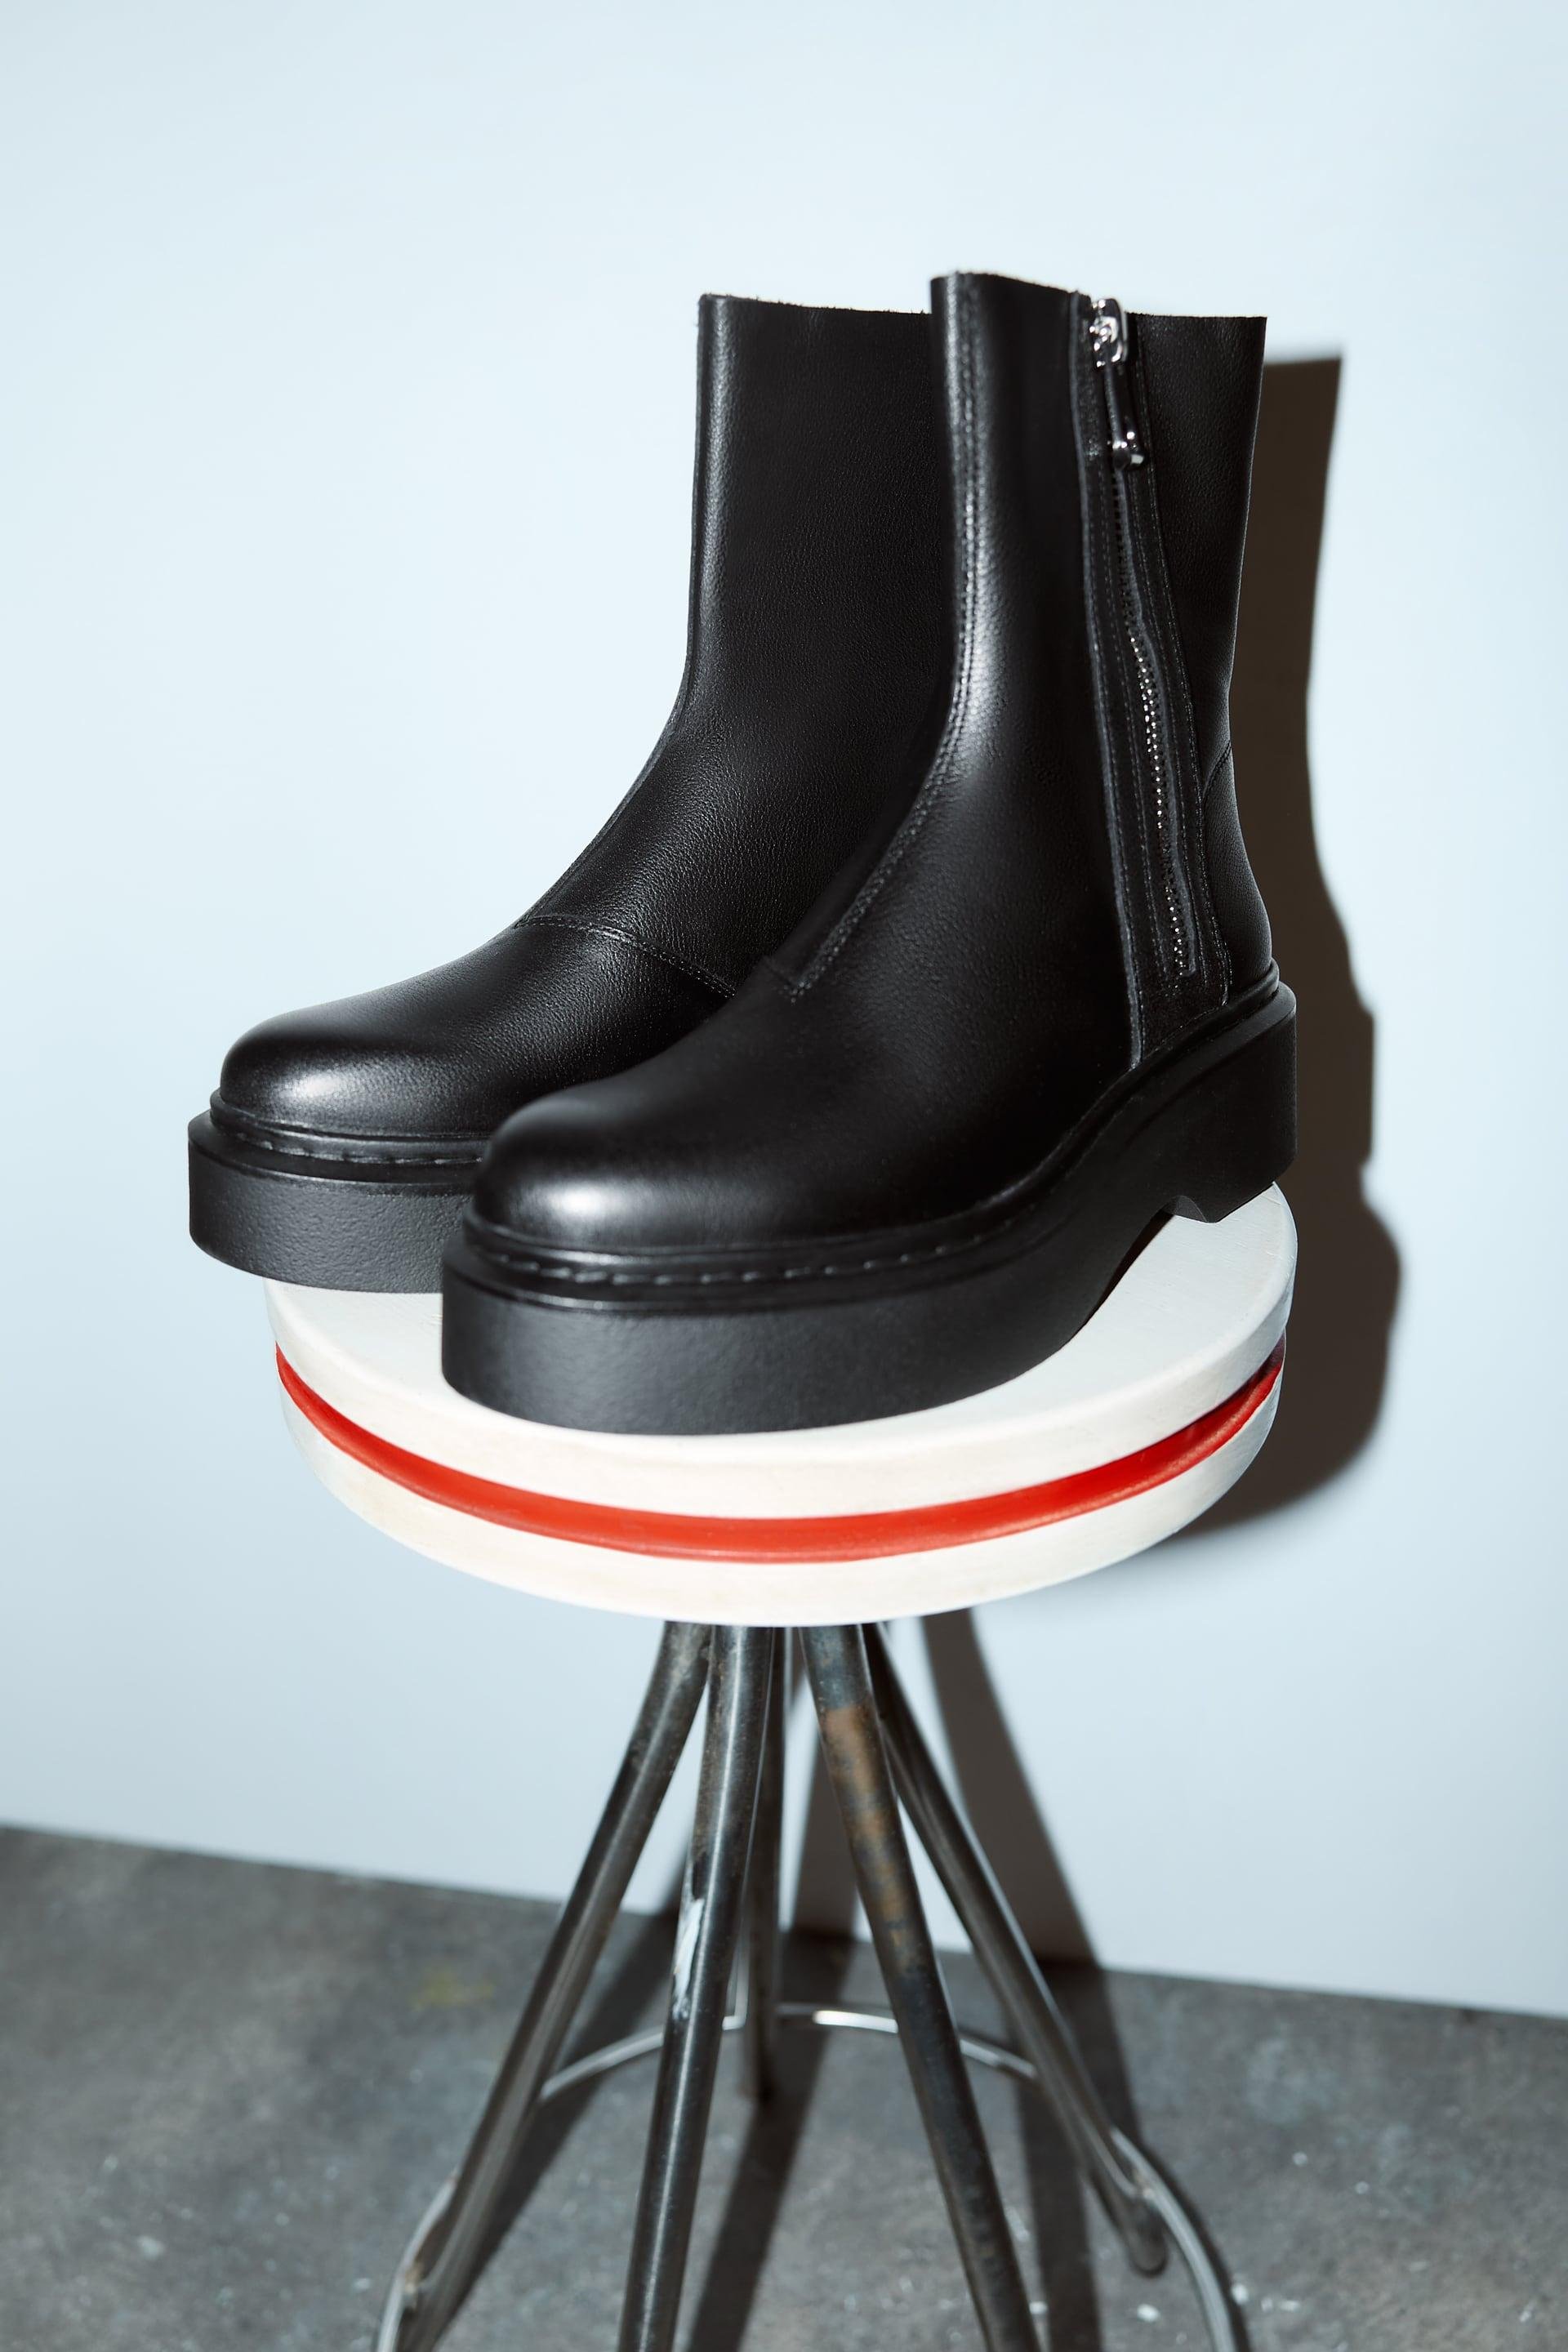 LOW HEELED LEATHER ANKLE BOOTS WITH ZIPPER by ZARA